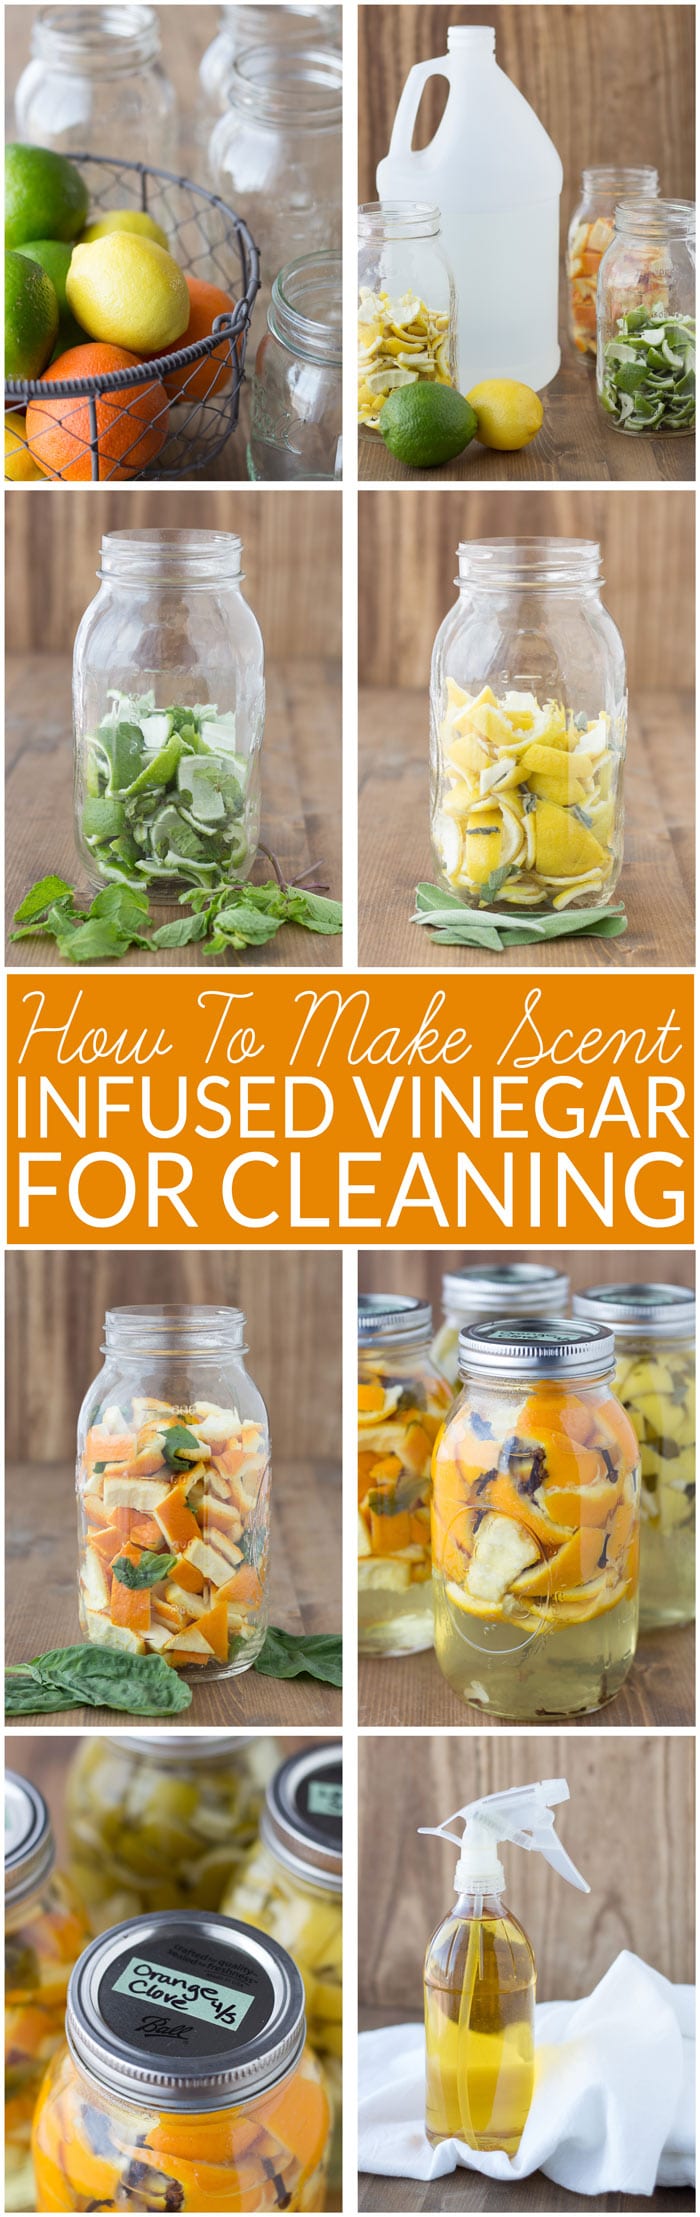 How to Make Scented Vinegar for Cleaning- This DIY cleaner made with citrus peels and herbs is easy to make and non-toxic. It cuts through grease with ease. Combines the cleaning power of vinegar and citus oil. If you love using vinegar for green cleaning but want to make it smell better, try this! All-natural, non-toxic cleaning. No essential oils.